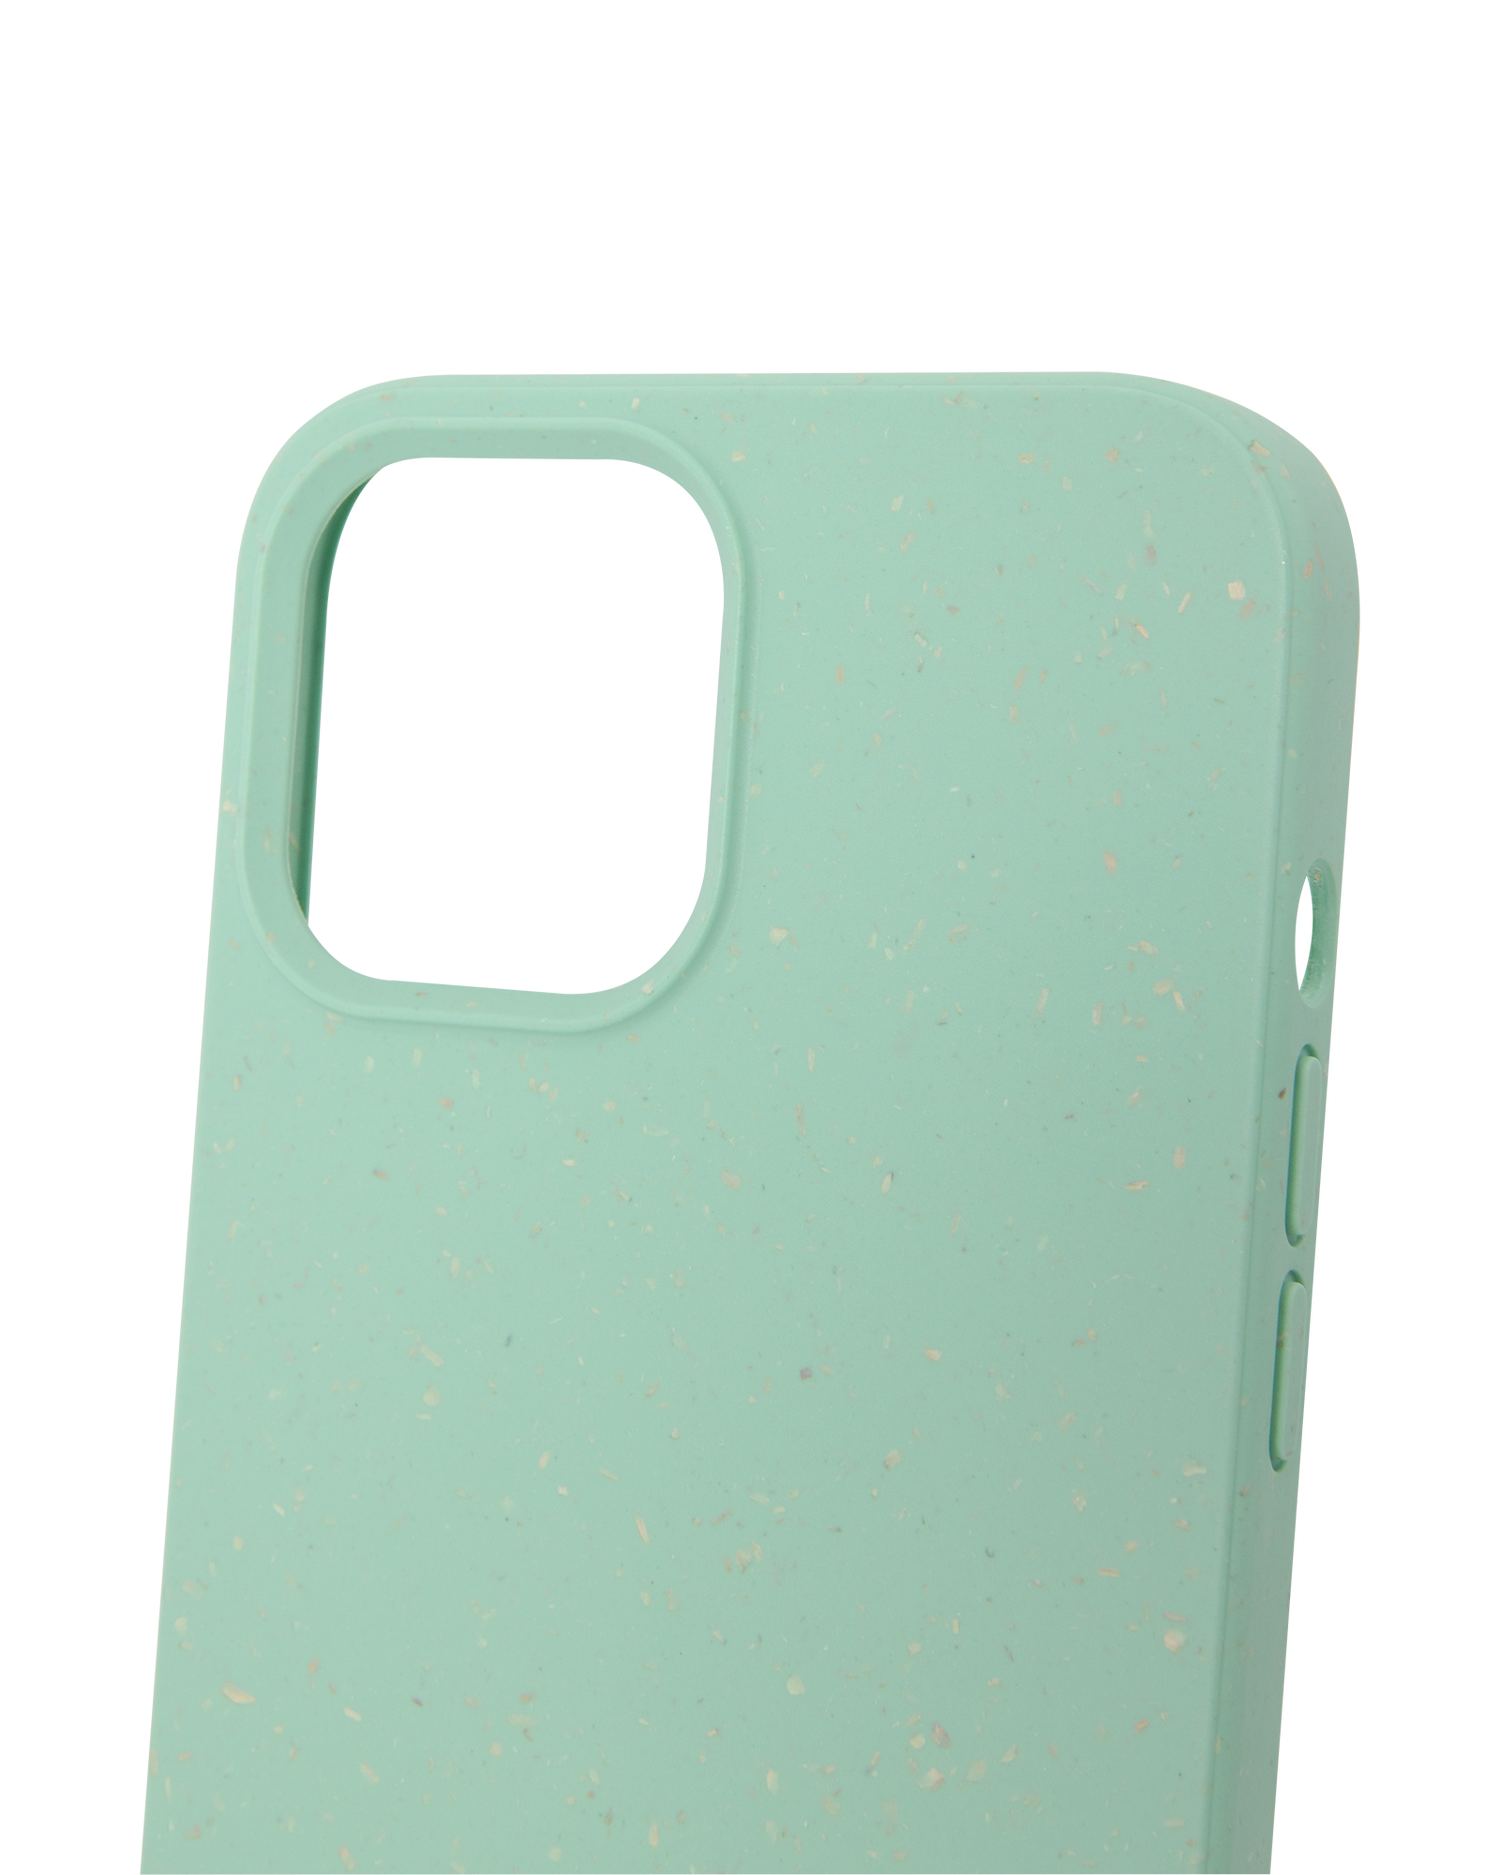 Light Green Eco-Friendly Phone Case for Apple iPhone 12 Pro Max: Details outside